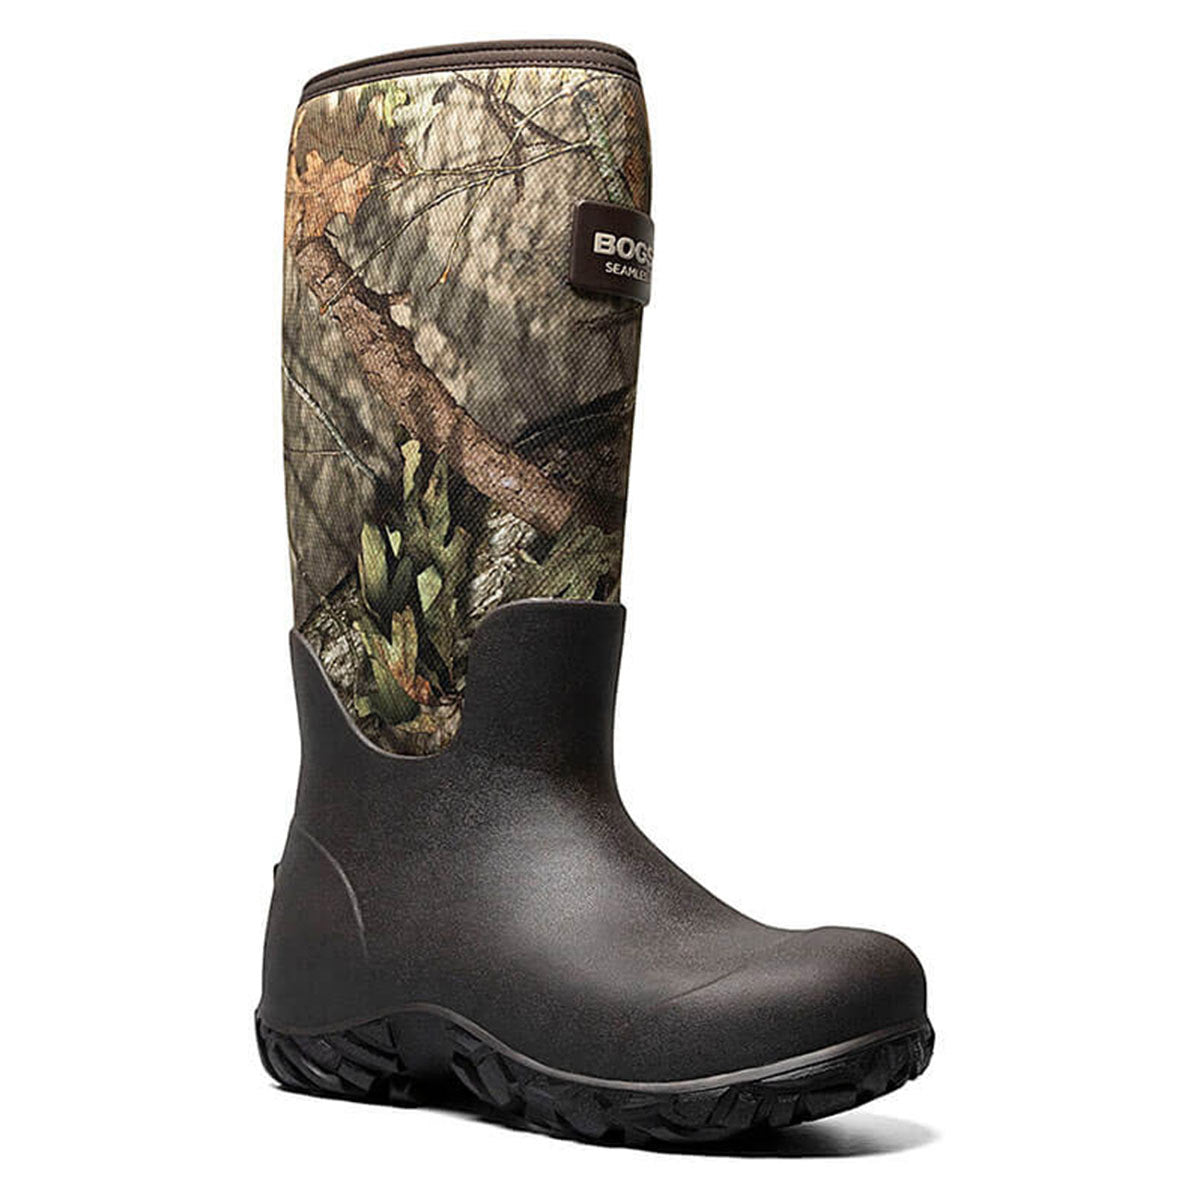 Camouflage and black Bogs Rut Hunter 17" LS Mossy Oak - Mens winter boot against a white background.